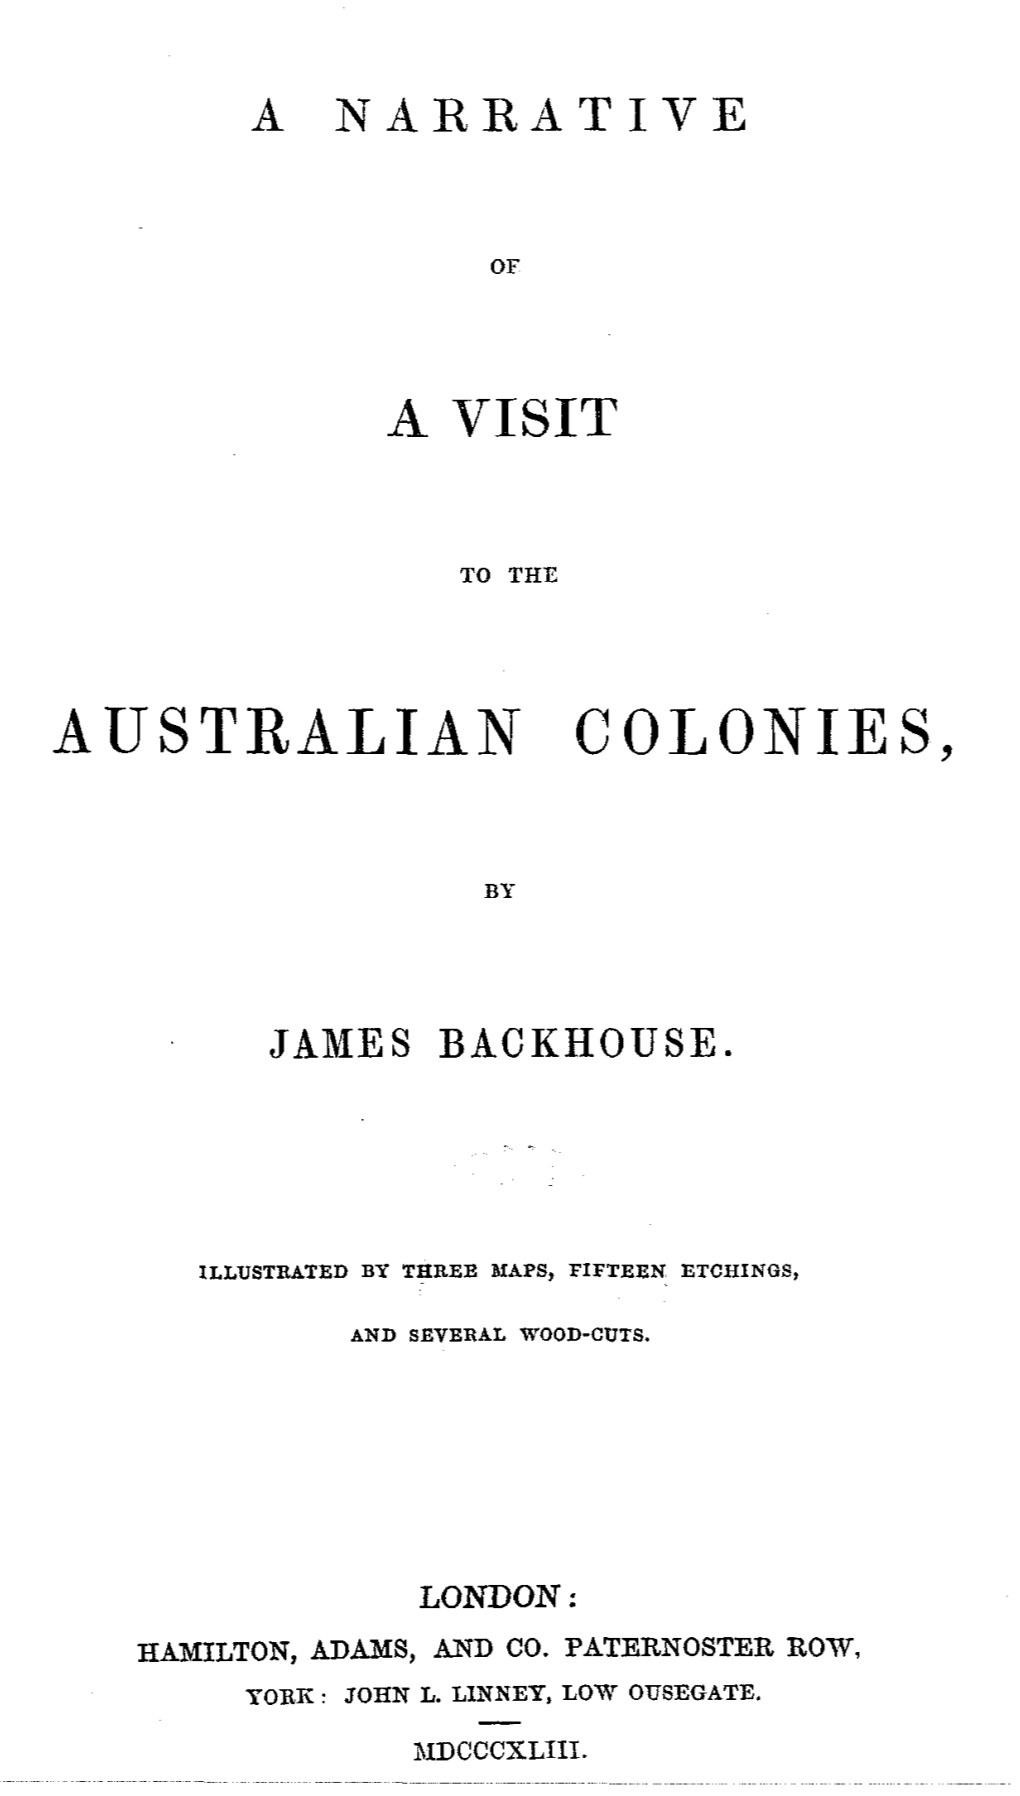 A Narrative of a Visit to the Australian Colonies. London